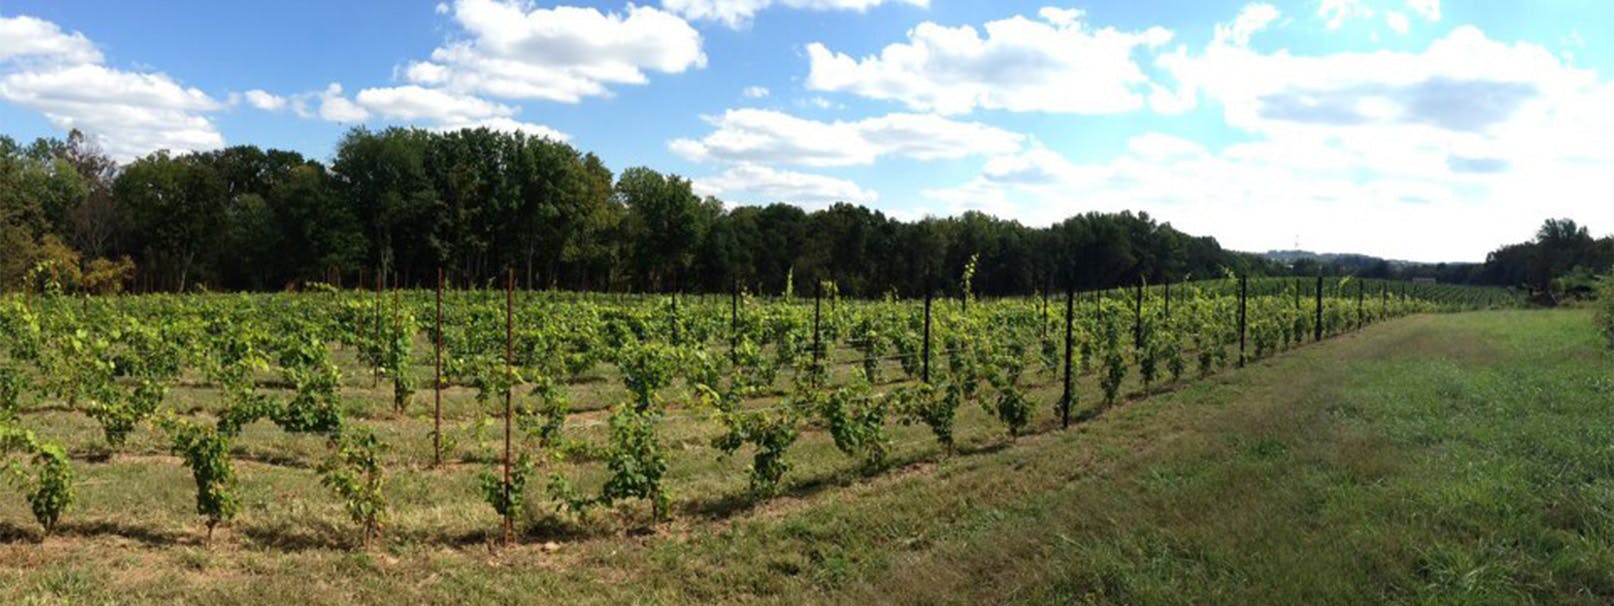 Wide-angle view of vineyard